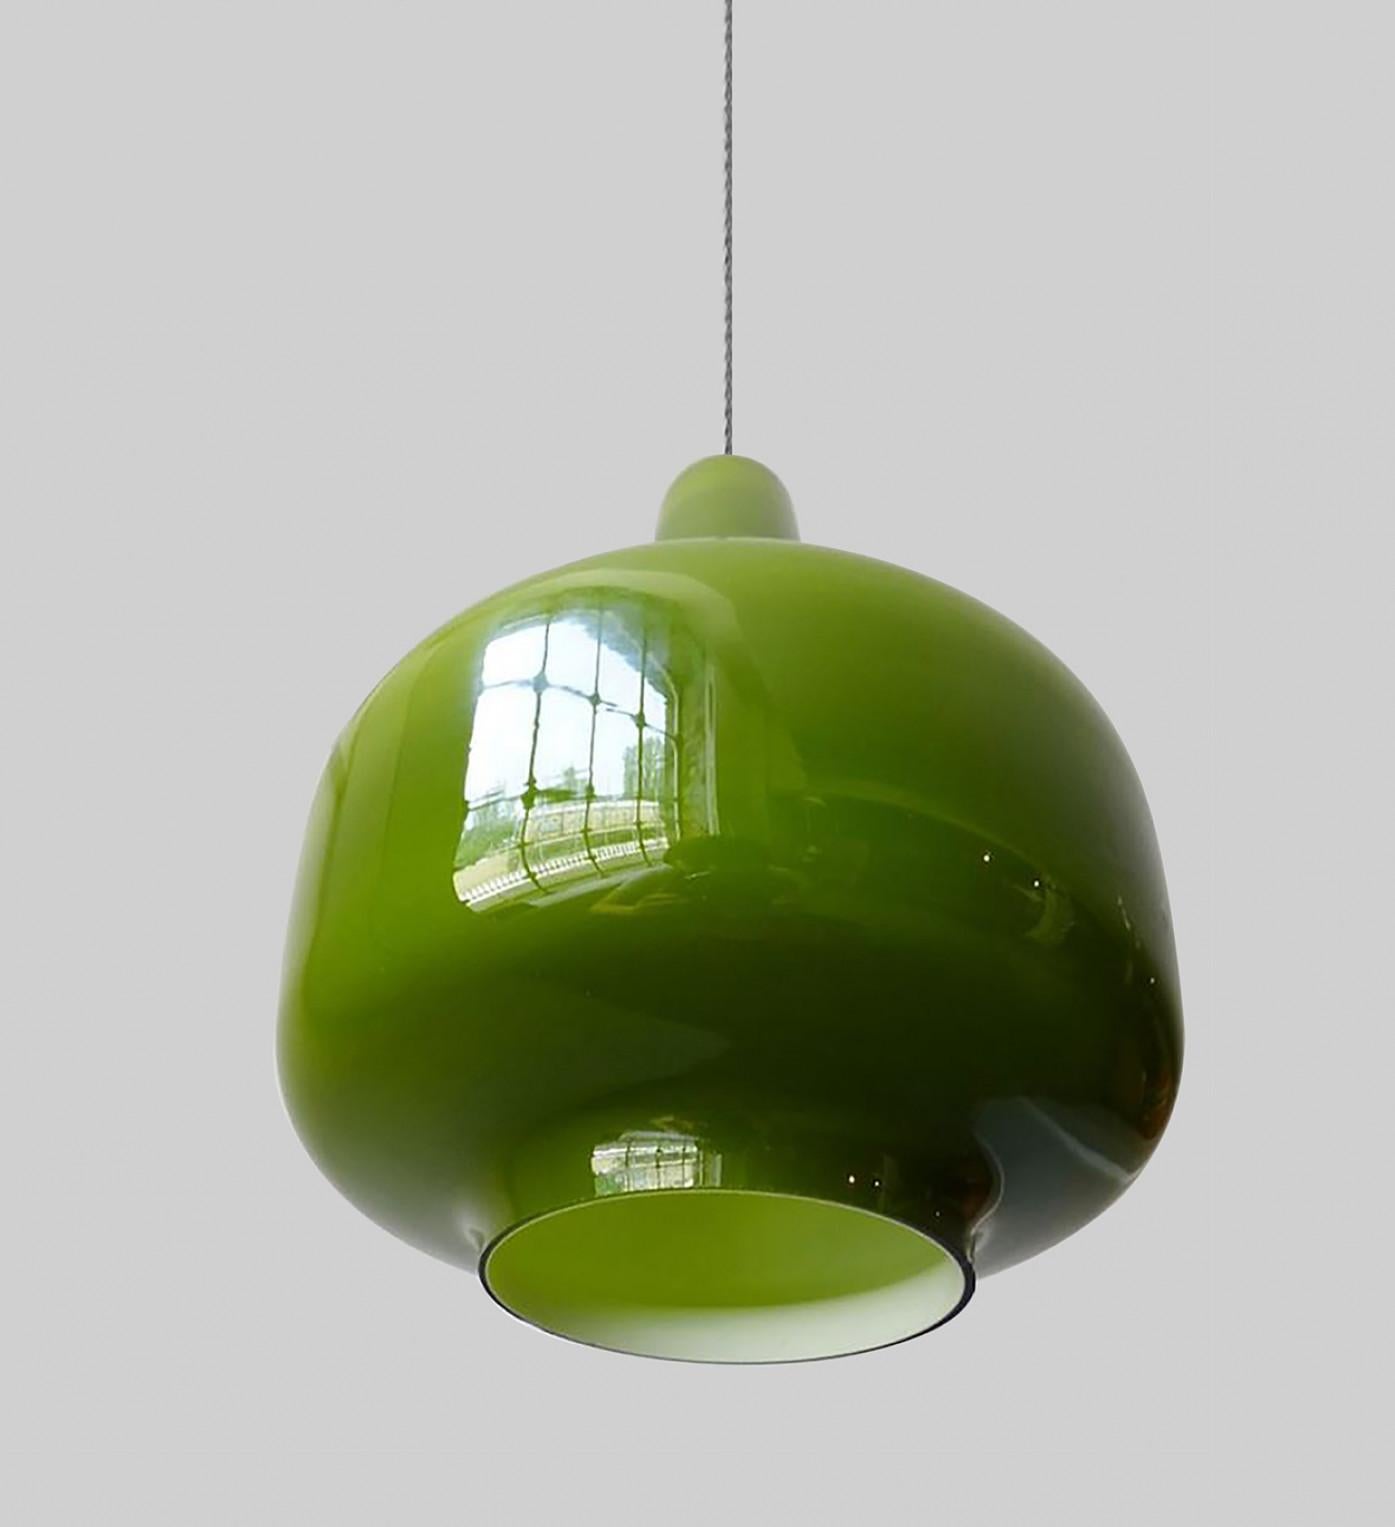 Pair of modernist wall lamps in beautiful warm green-colored glass. With lovely steel or transparent cable for a clean modern look.
We can deliver different colors of cables and ceiling cups (also purple).

Designed and made in Sweden by Hans-Agne